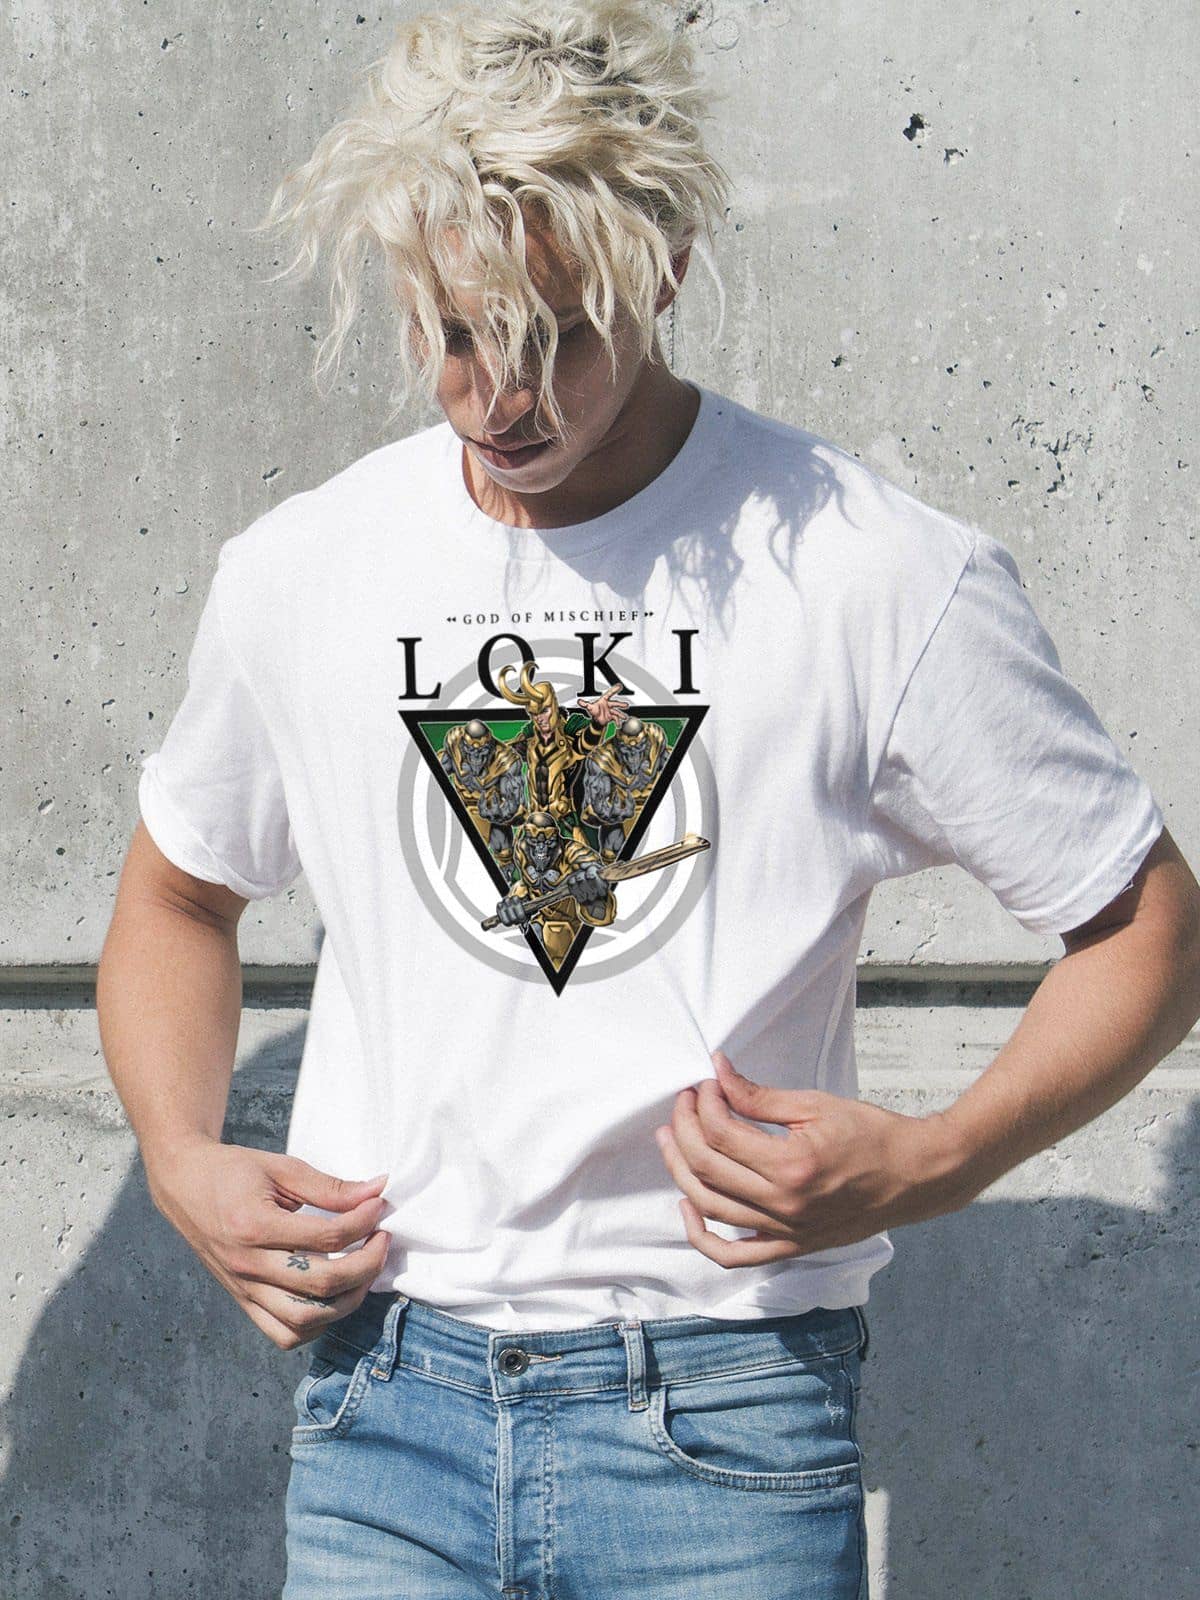 Loki The God Of Mischief Exclusive T Shirt for Comic Book Fans | Premium Design | Catch My Drift India - Catch My Drift India  clothing, general, loki, made in india, marvel, movies, shirt, s